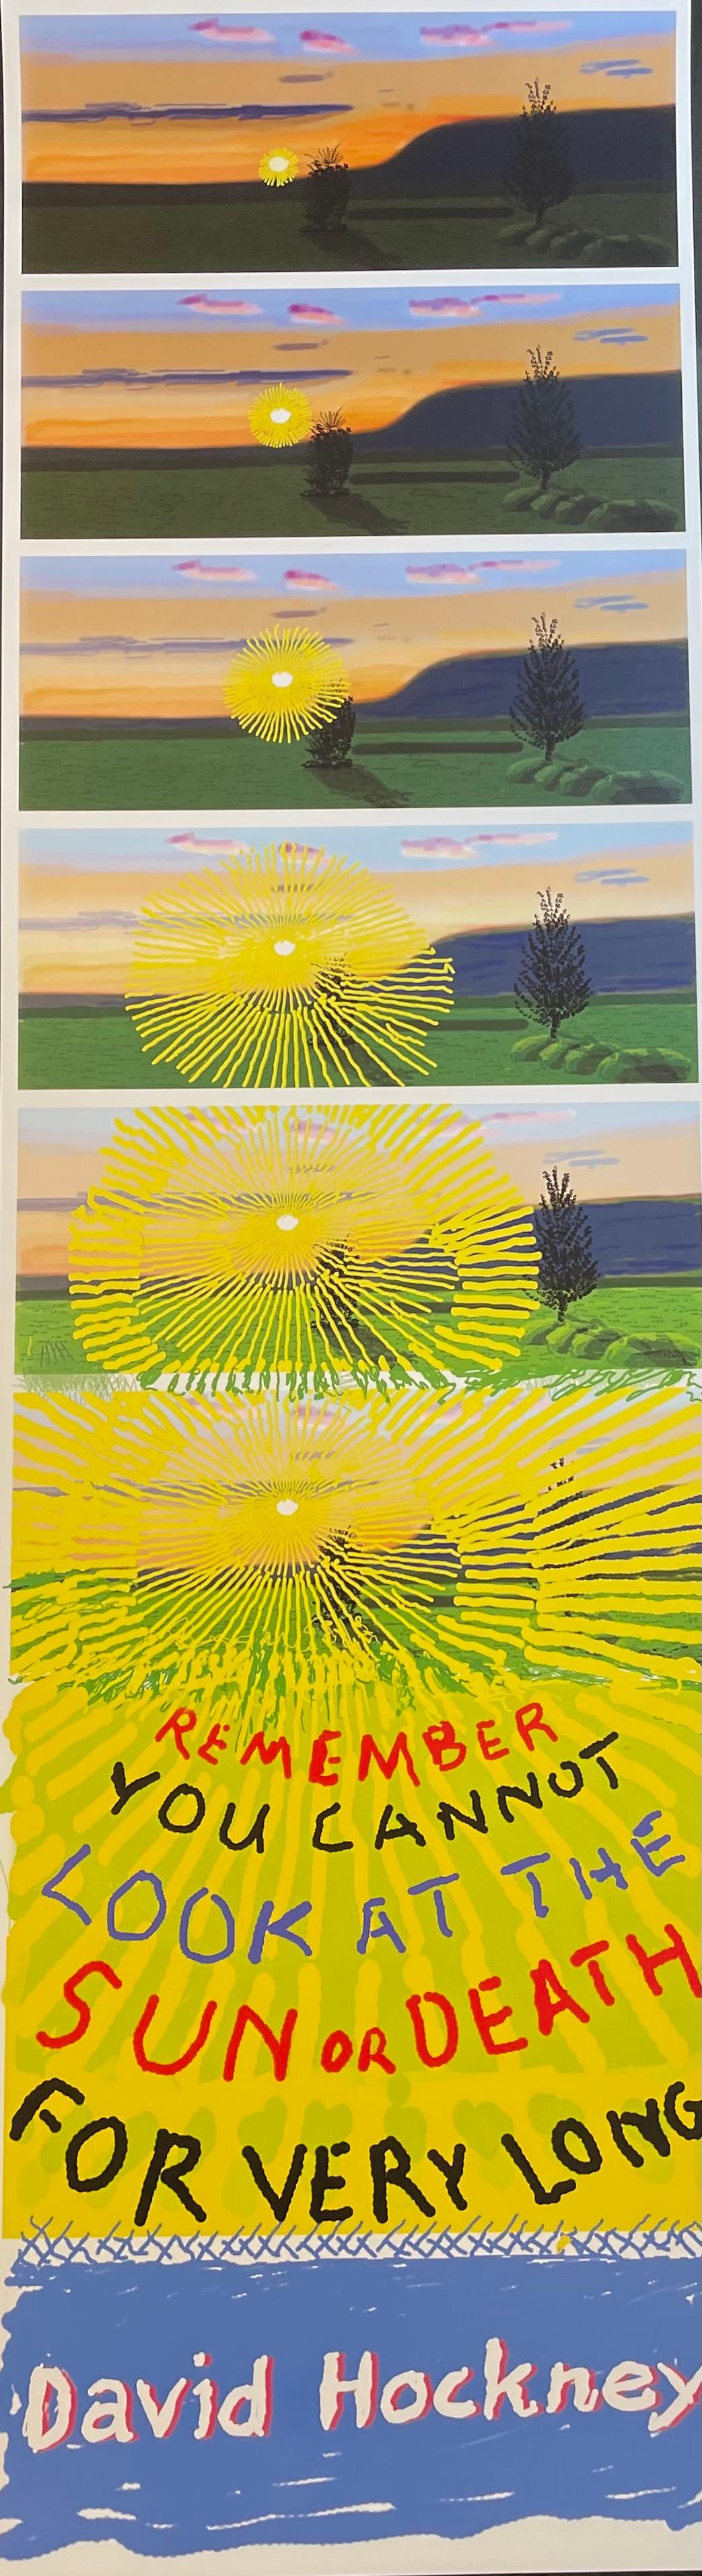 David Hockney Remember You Cannot Look At The Sun Or Death For Very Long COA